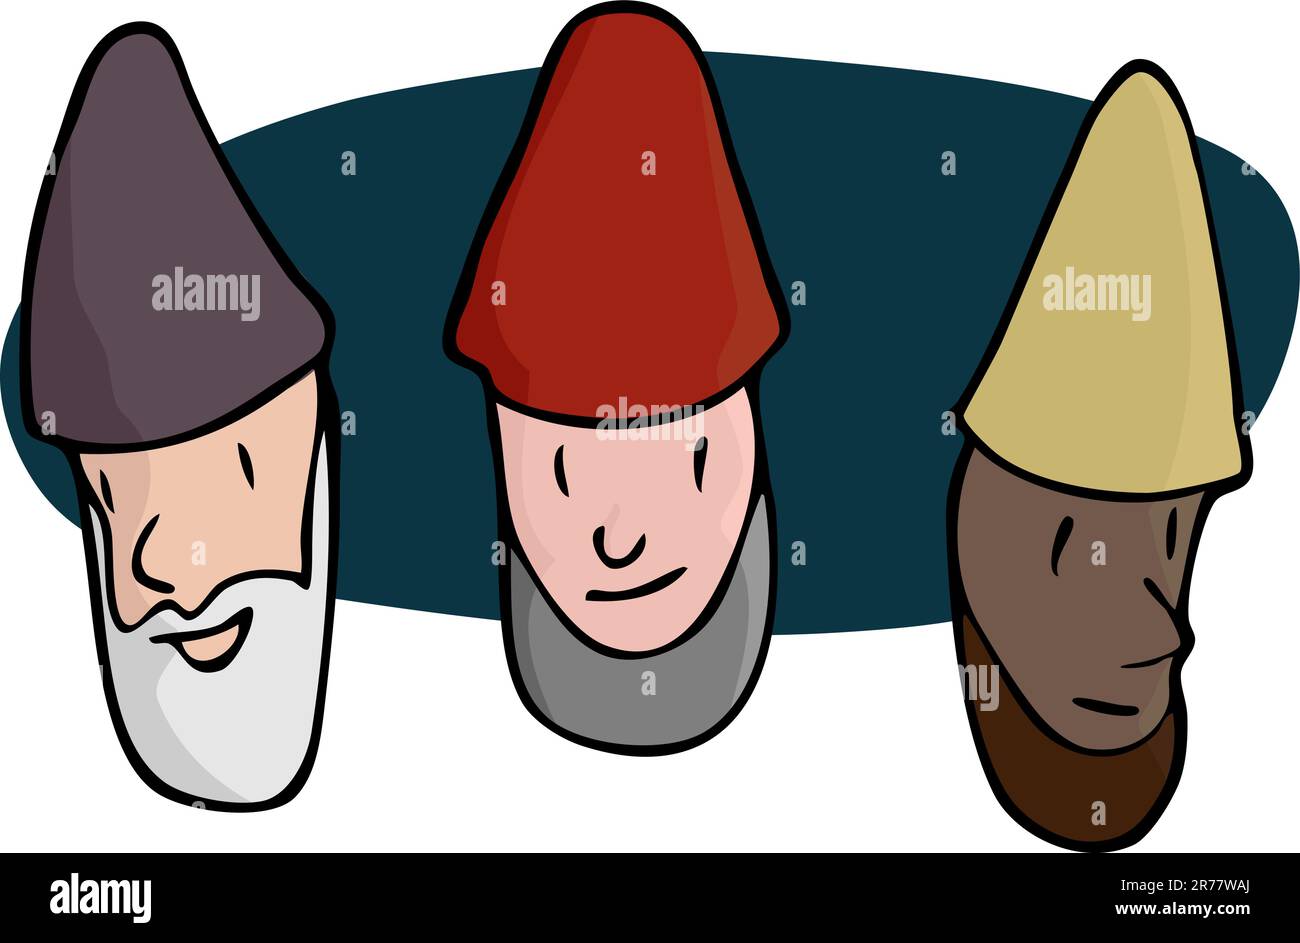 Portraits of three bearded gnomes, wizards or religious men in various skin colors. Stock Vector